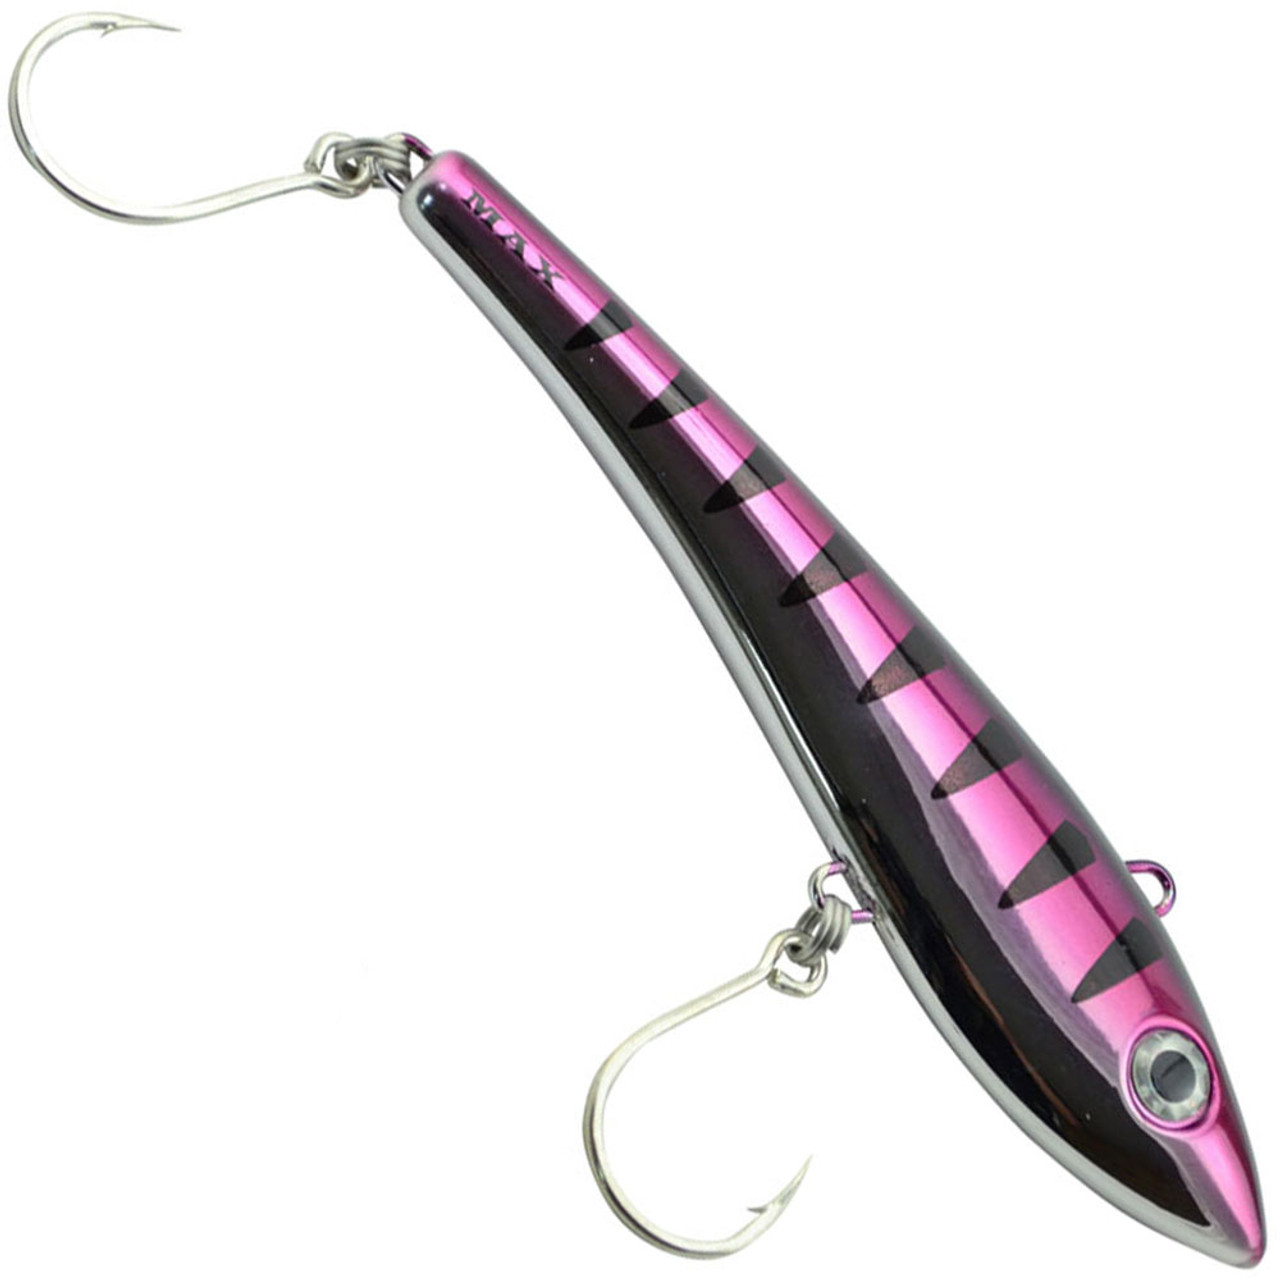 Halco Max Lure For Sale Size 110, 130, 190 or 220